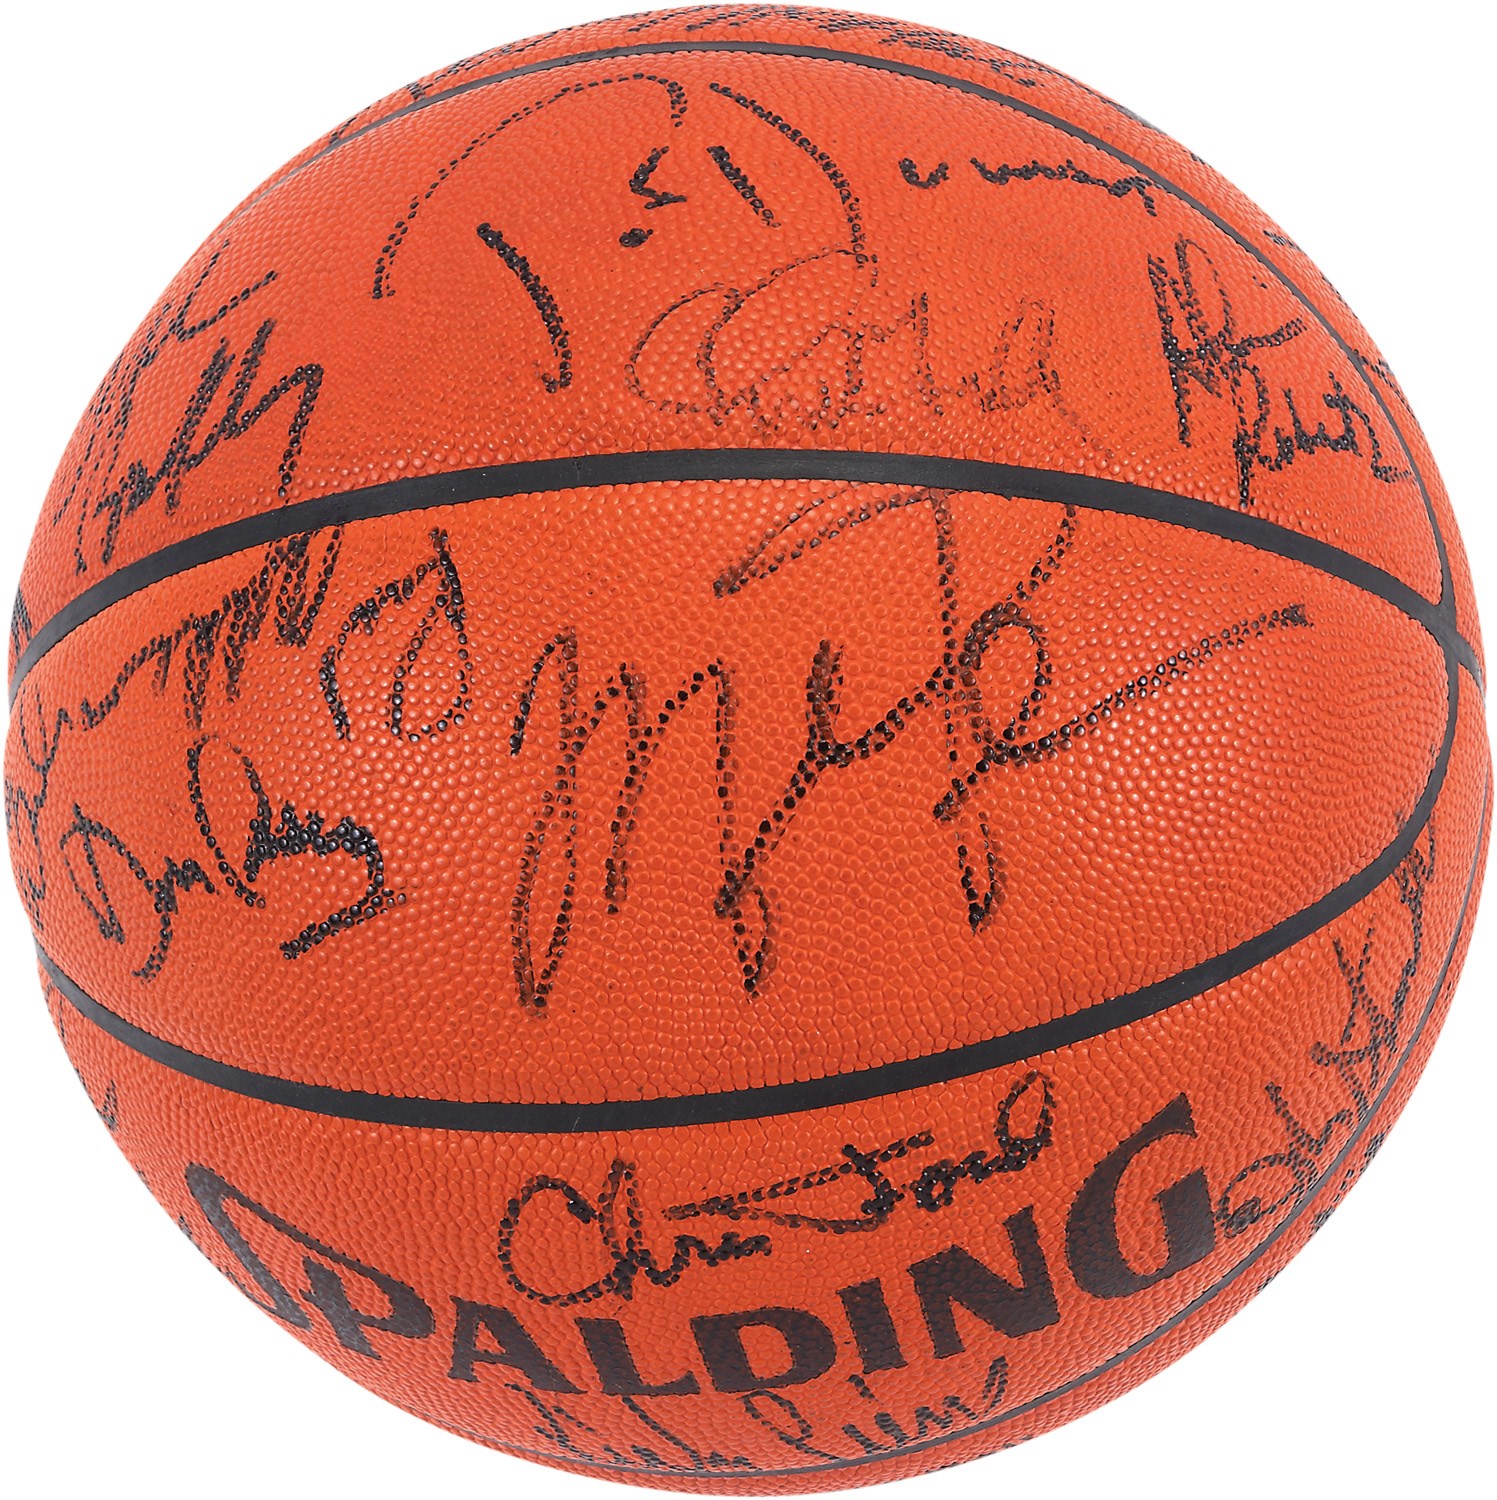 1991 NBA Eastern & Western Conference All-Star Complete Team-Signed Basketball